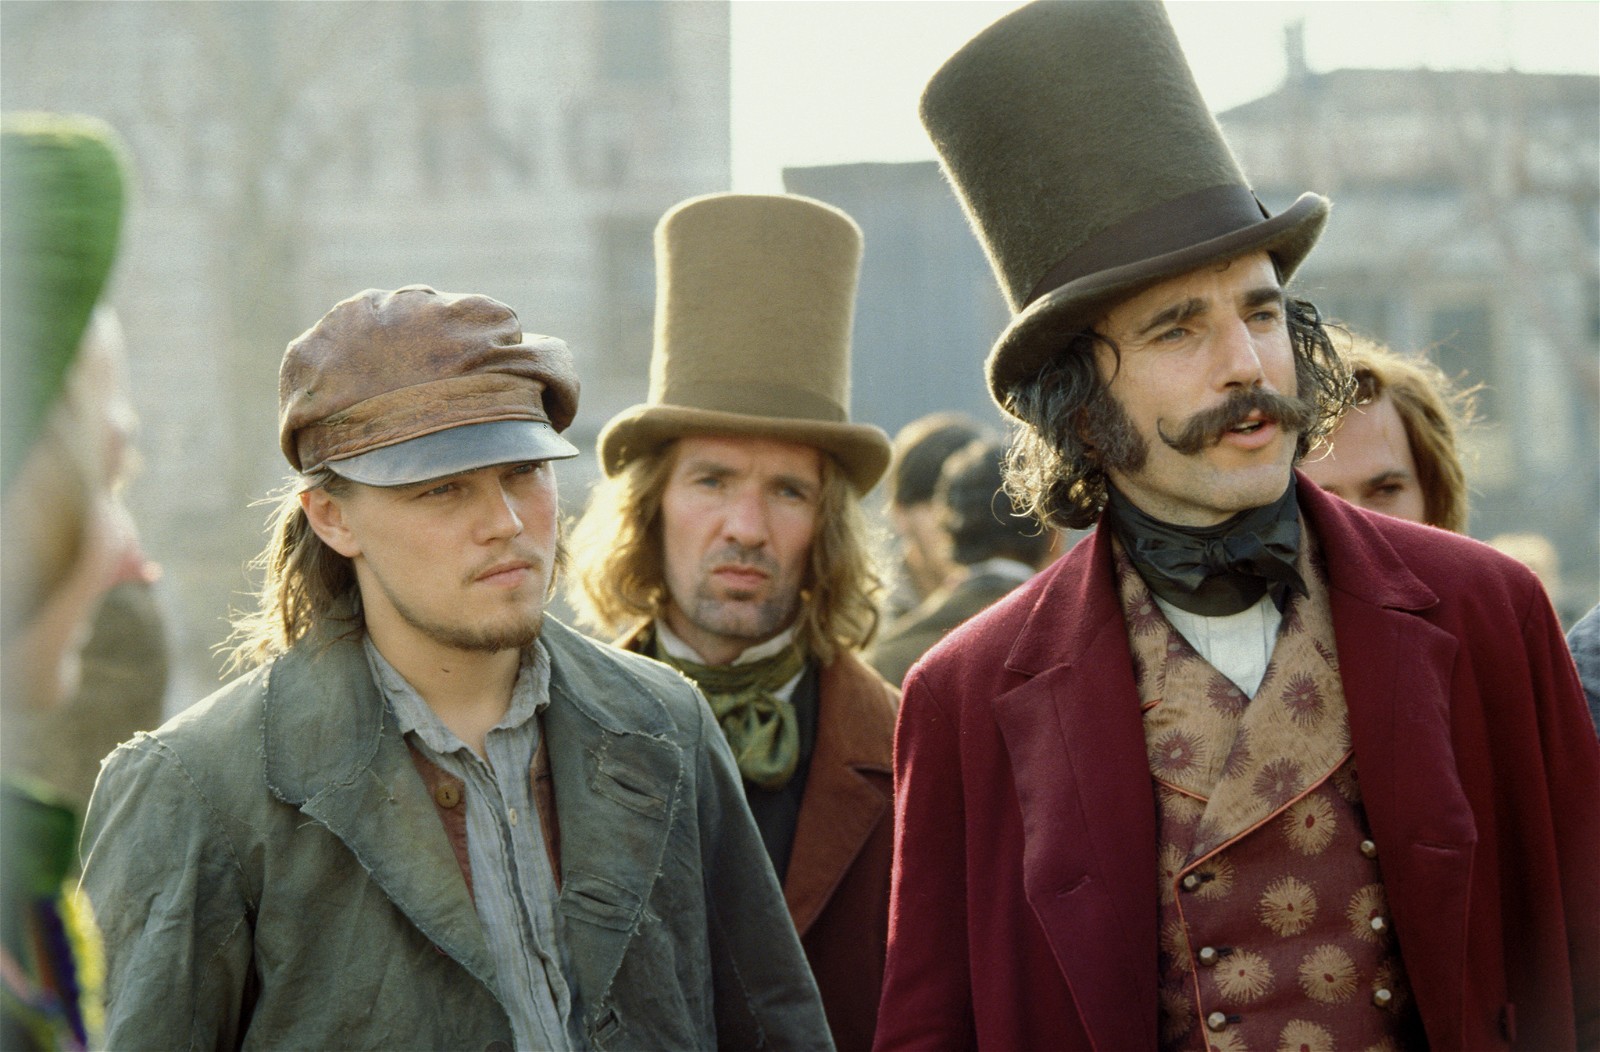 Leonardo DiCaprio as Amsterdam Vallon and Daniel Day-Lewis as Bill the Butcher in Gangs of New York